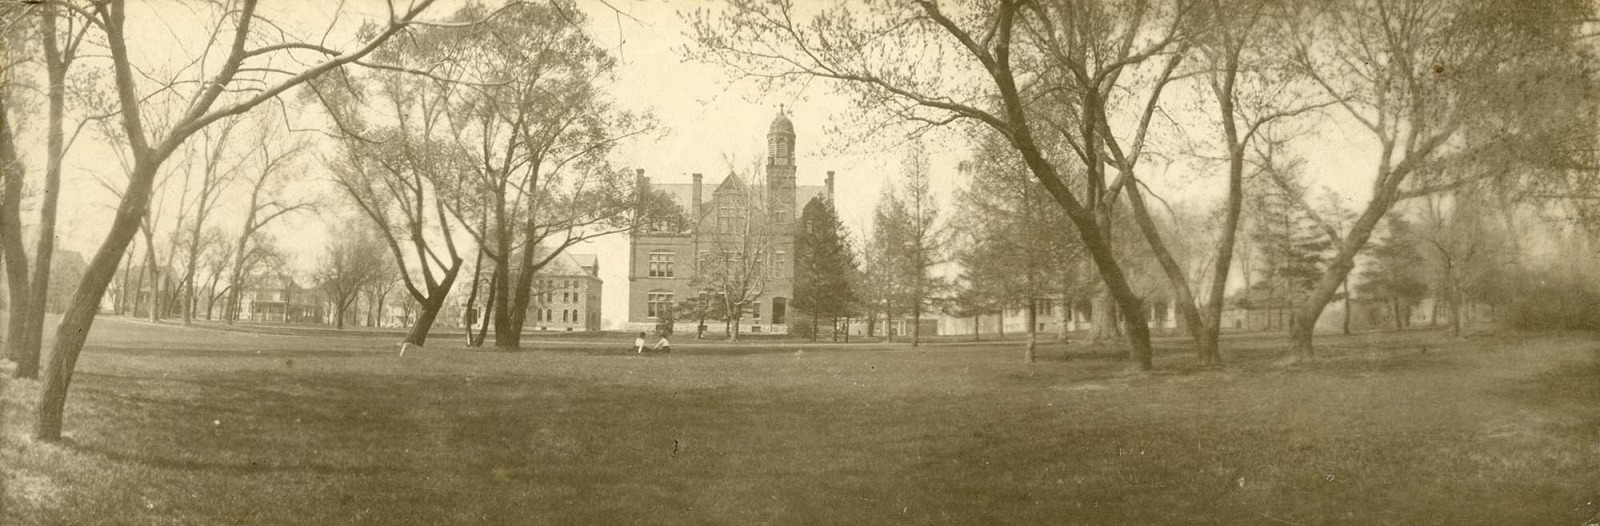 Sepia toned image of campus with only a few building and two women sitting on the lawn 